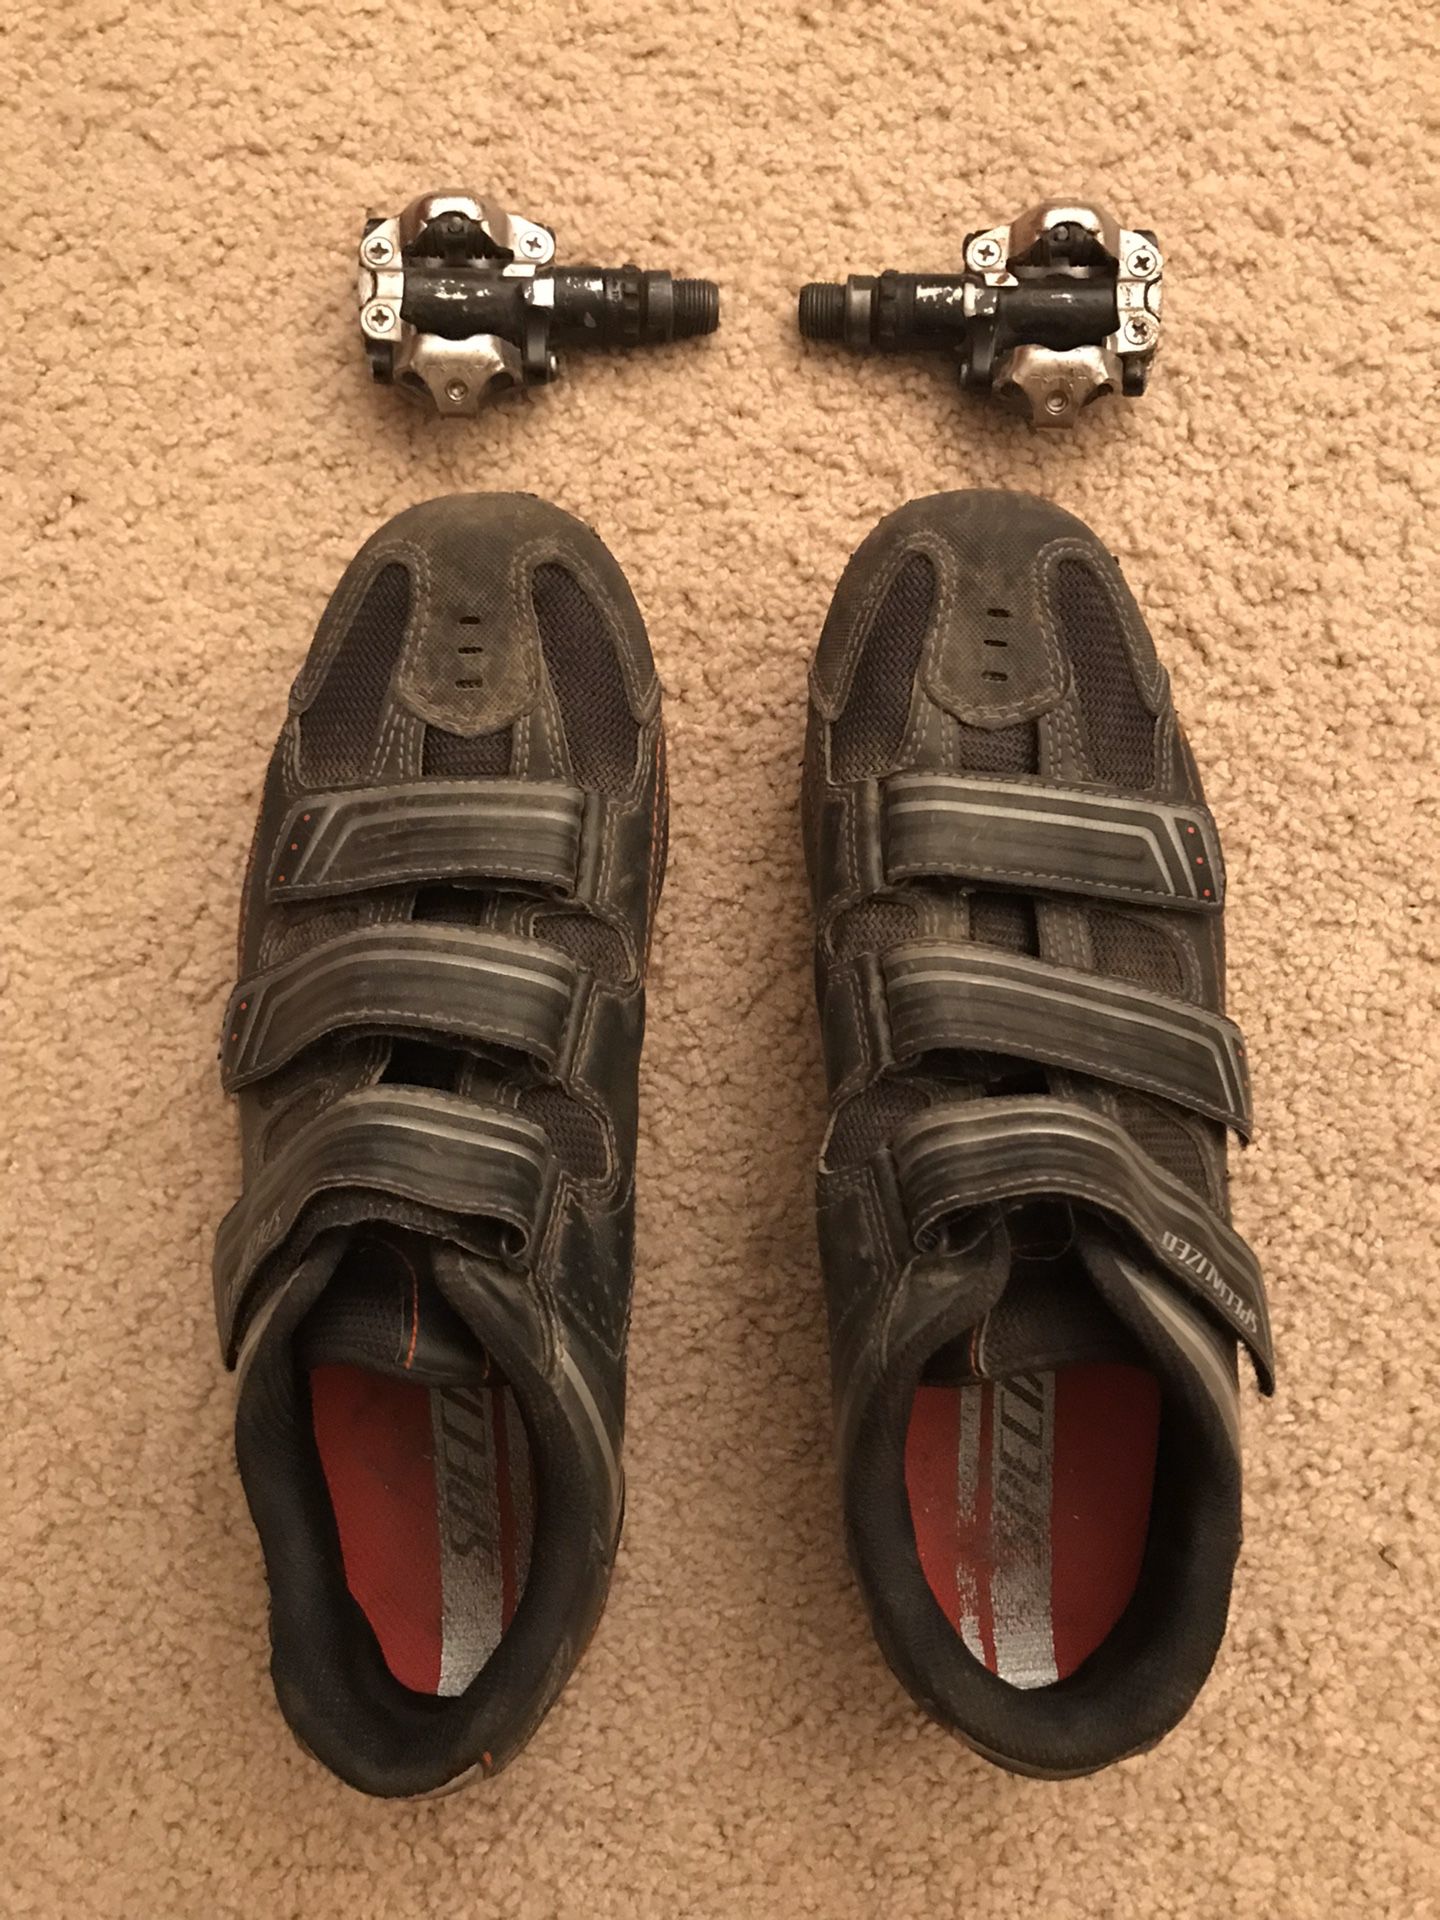 Specialized clip-in bike shoes and pedals (size 10)